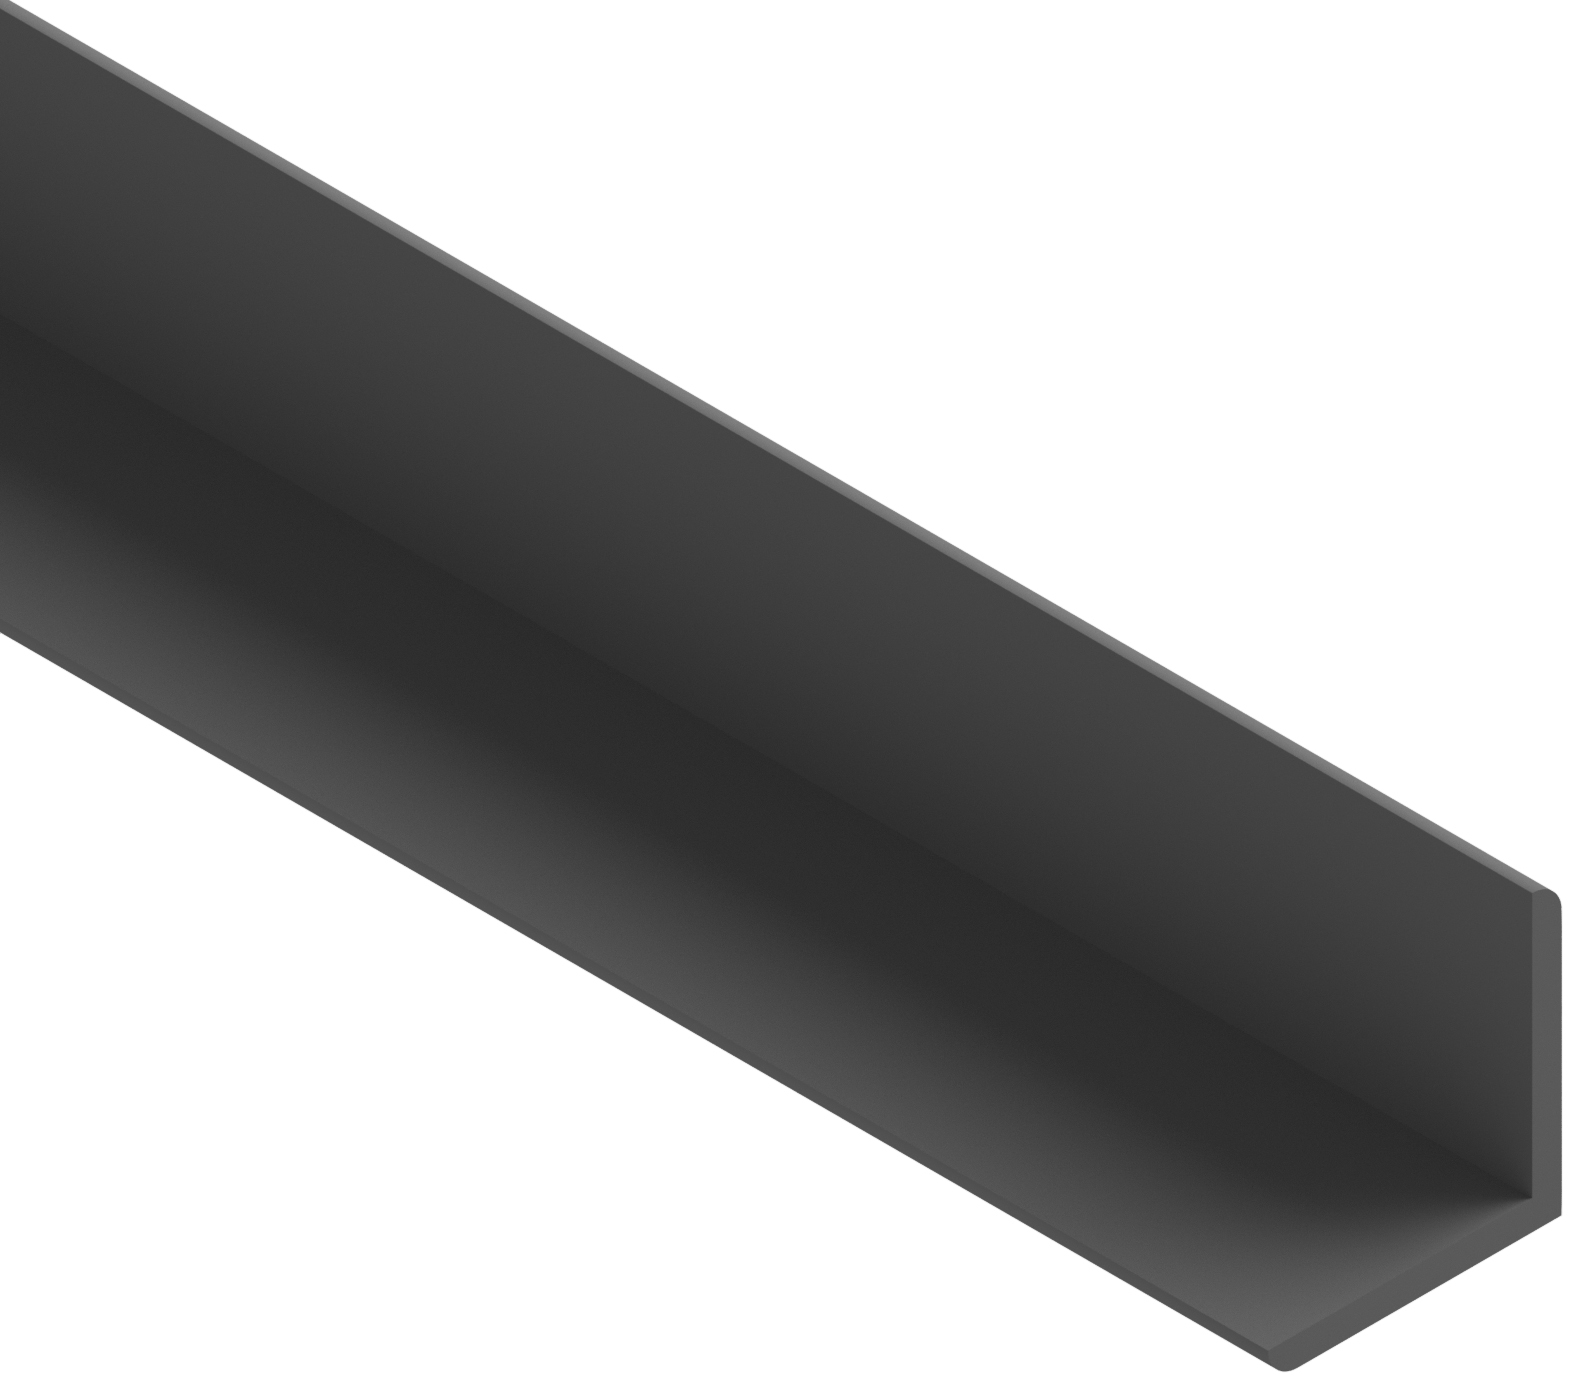 Image of Cheshire Mouldings Black PVC Angle - 12 x 12 x 2400mm